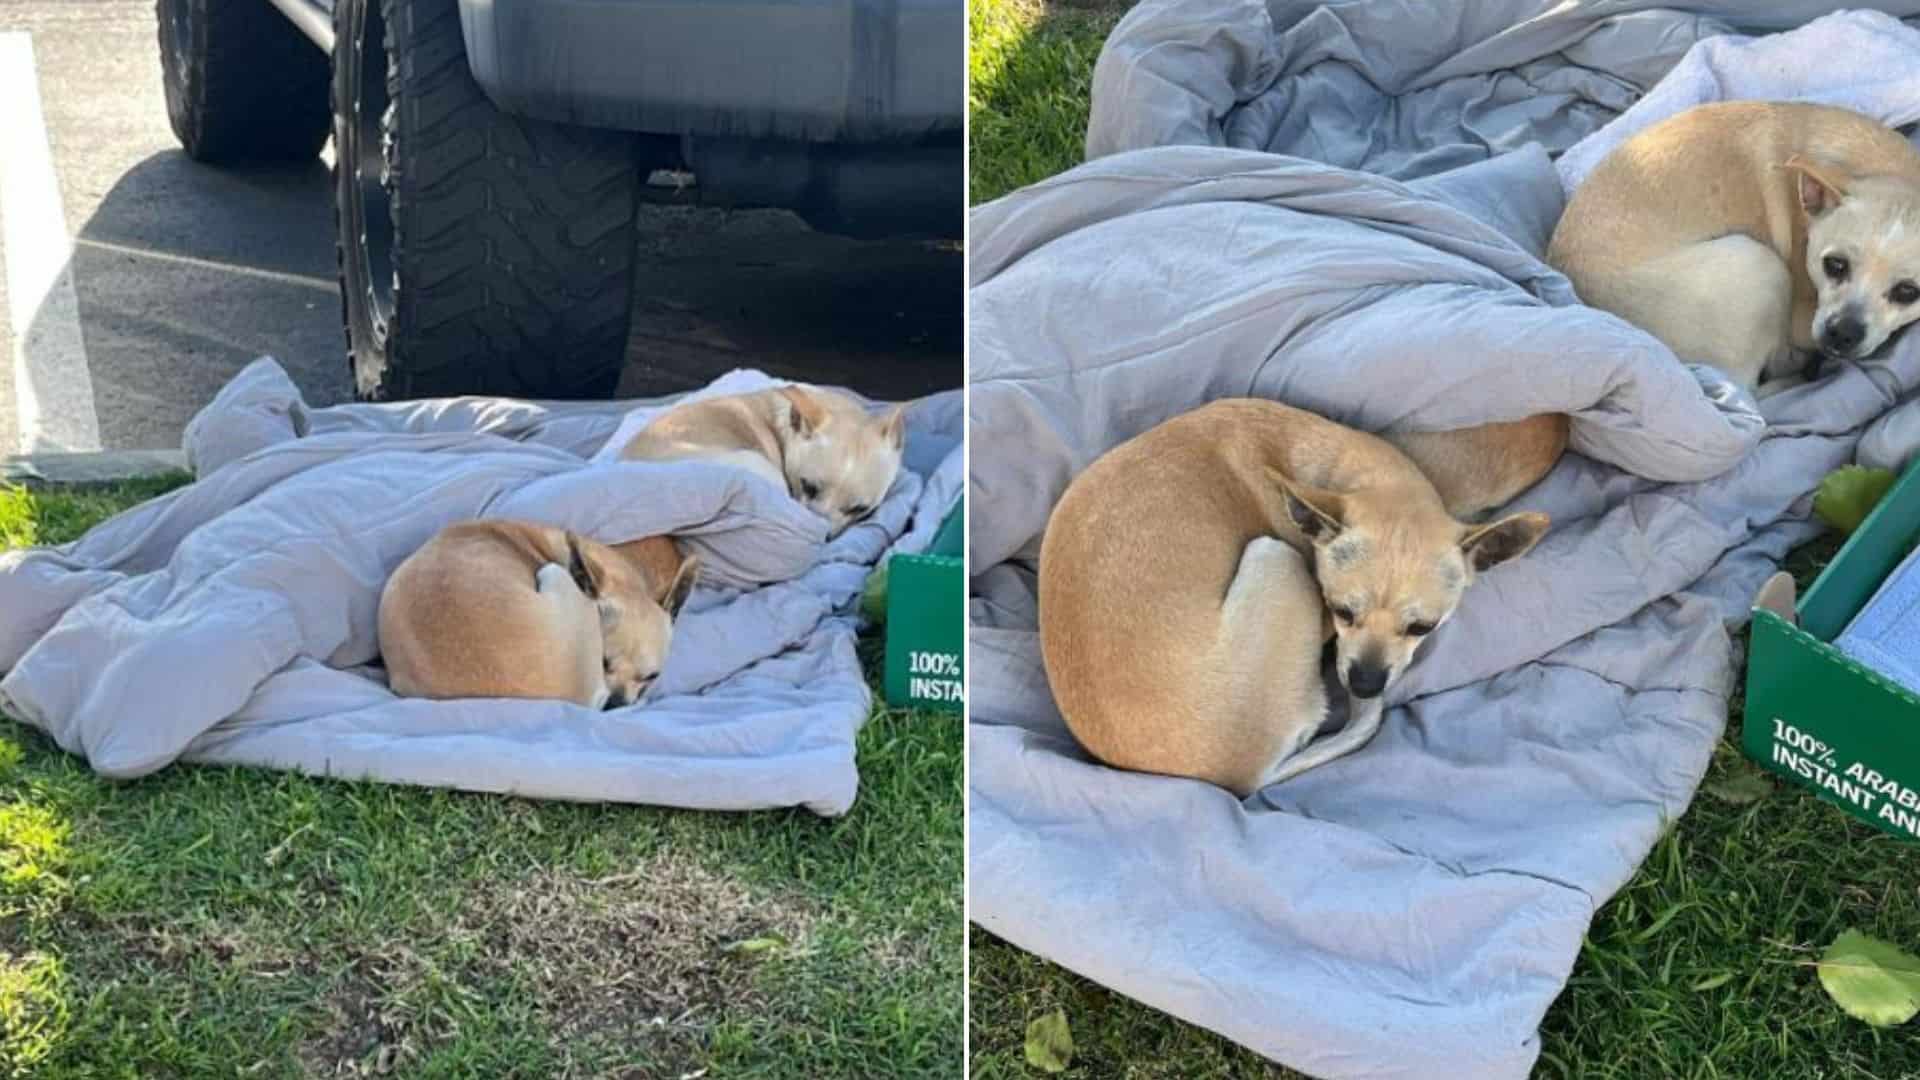 Rescuer Was Surprised To See 3 Abandoned Dogs Lying On An Old Blanket In The Street